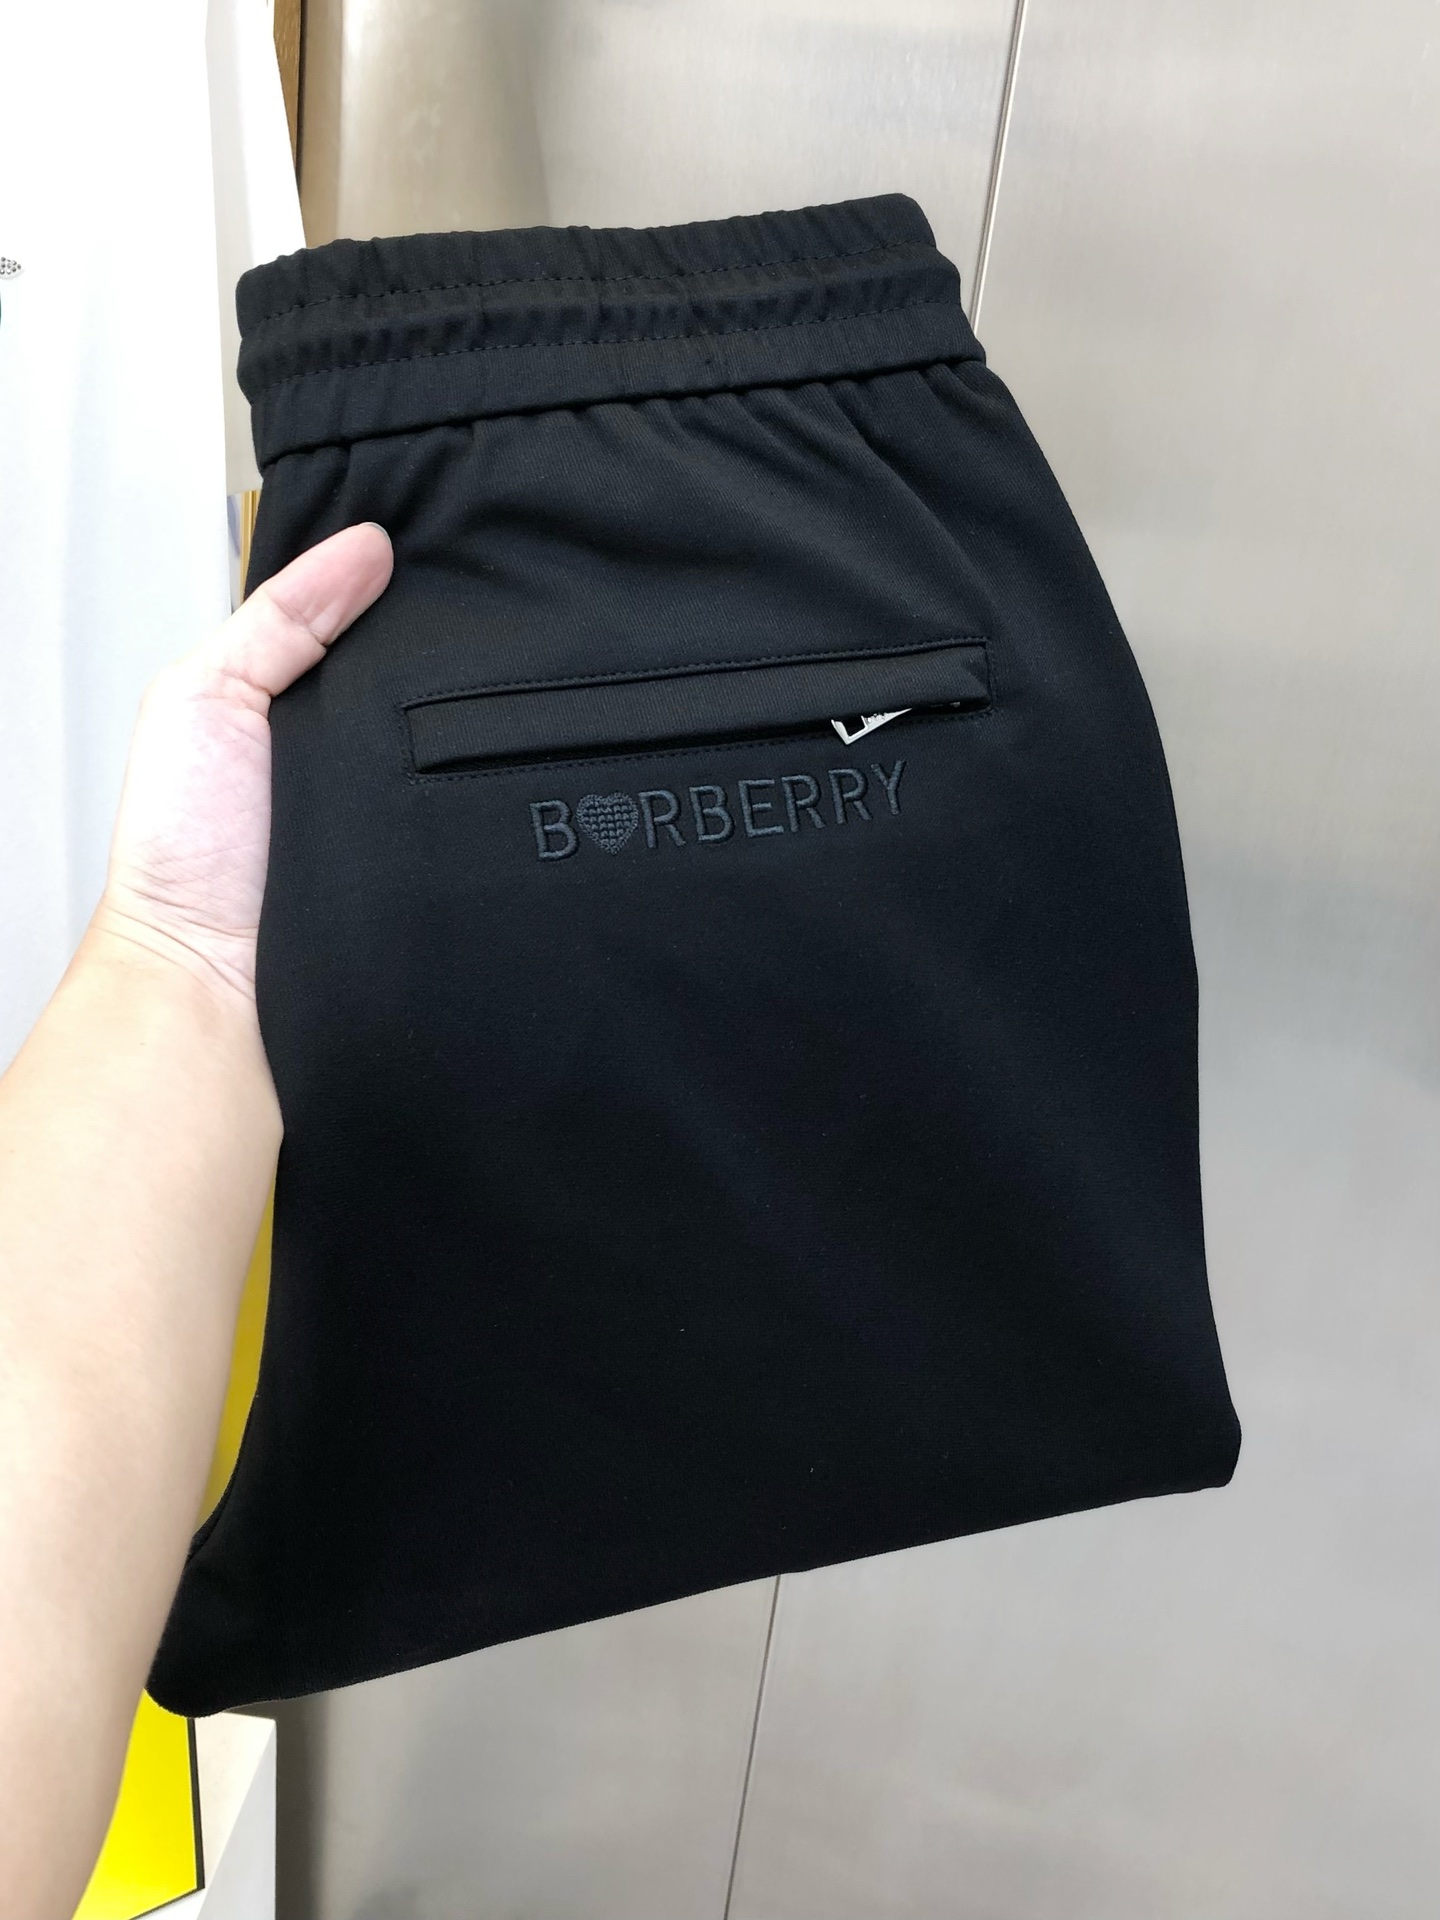 Burberry Clothing Pants & Trousers Buy High Quality Cheap Hot Replica
 Black Embroidery Men Cotton Knitting Fall/Winter Collection Fashion Casual